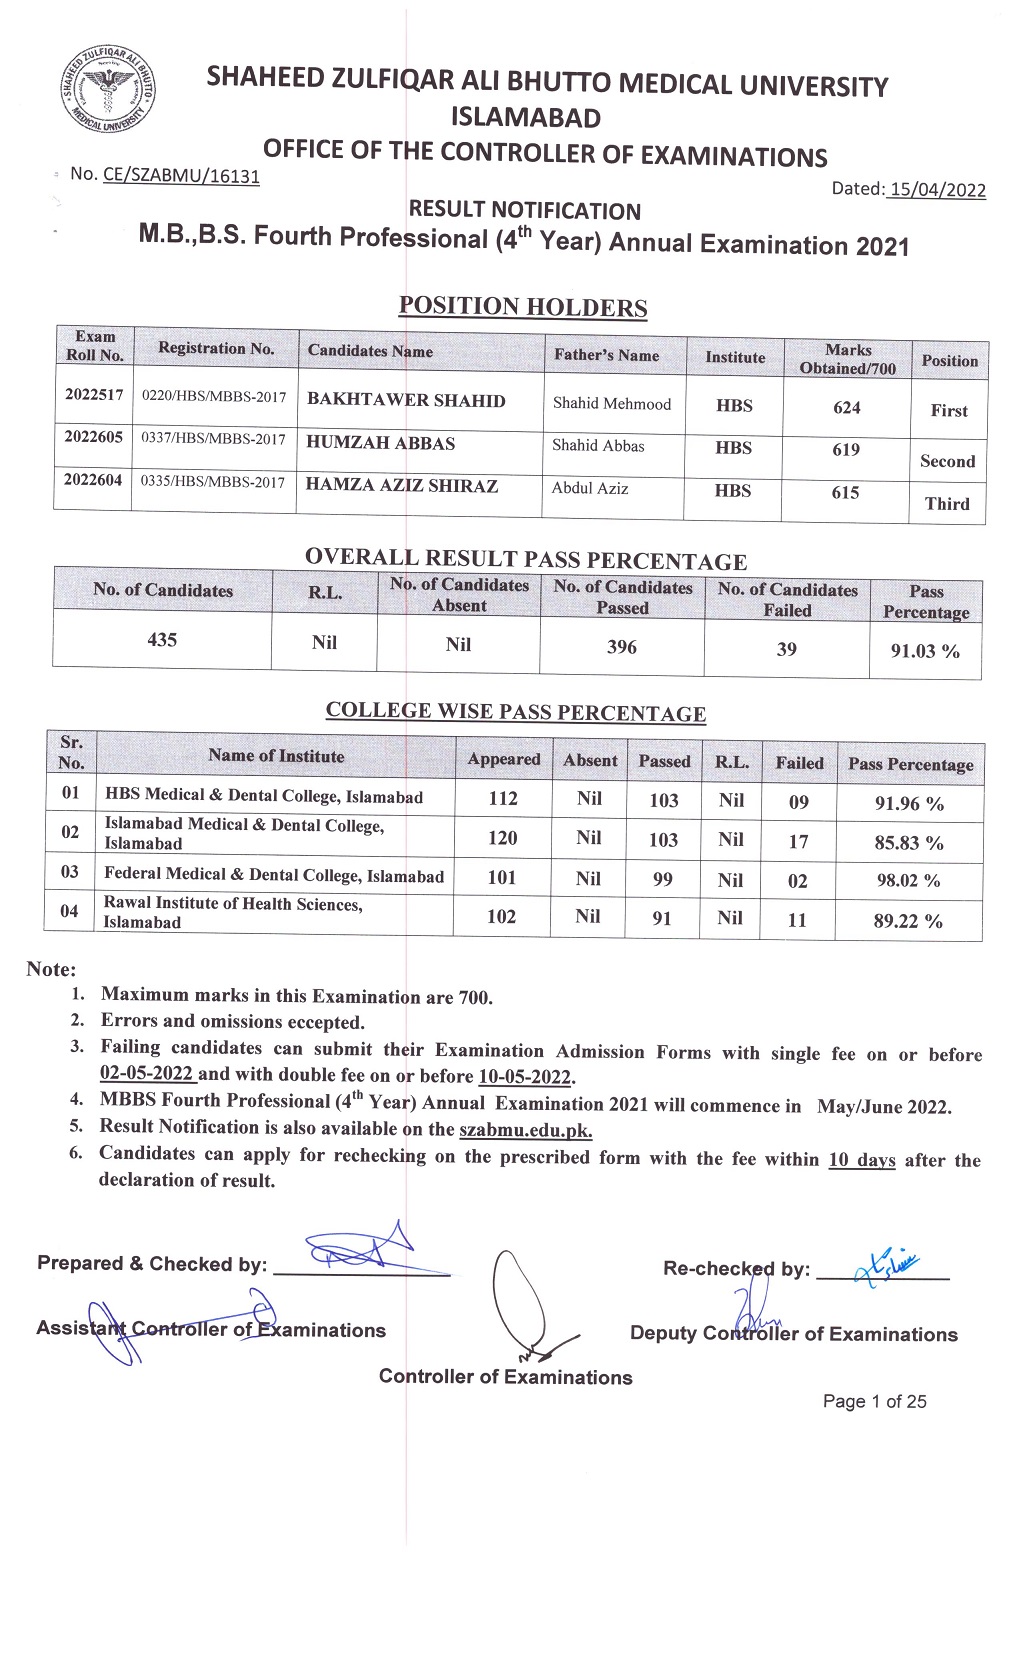 Result Notification - MBBS 4th Professional Annual Examination 2021